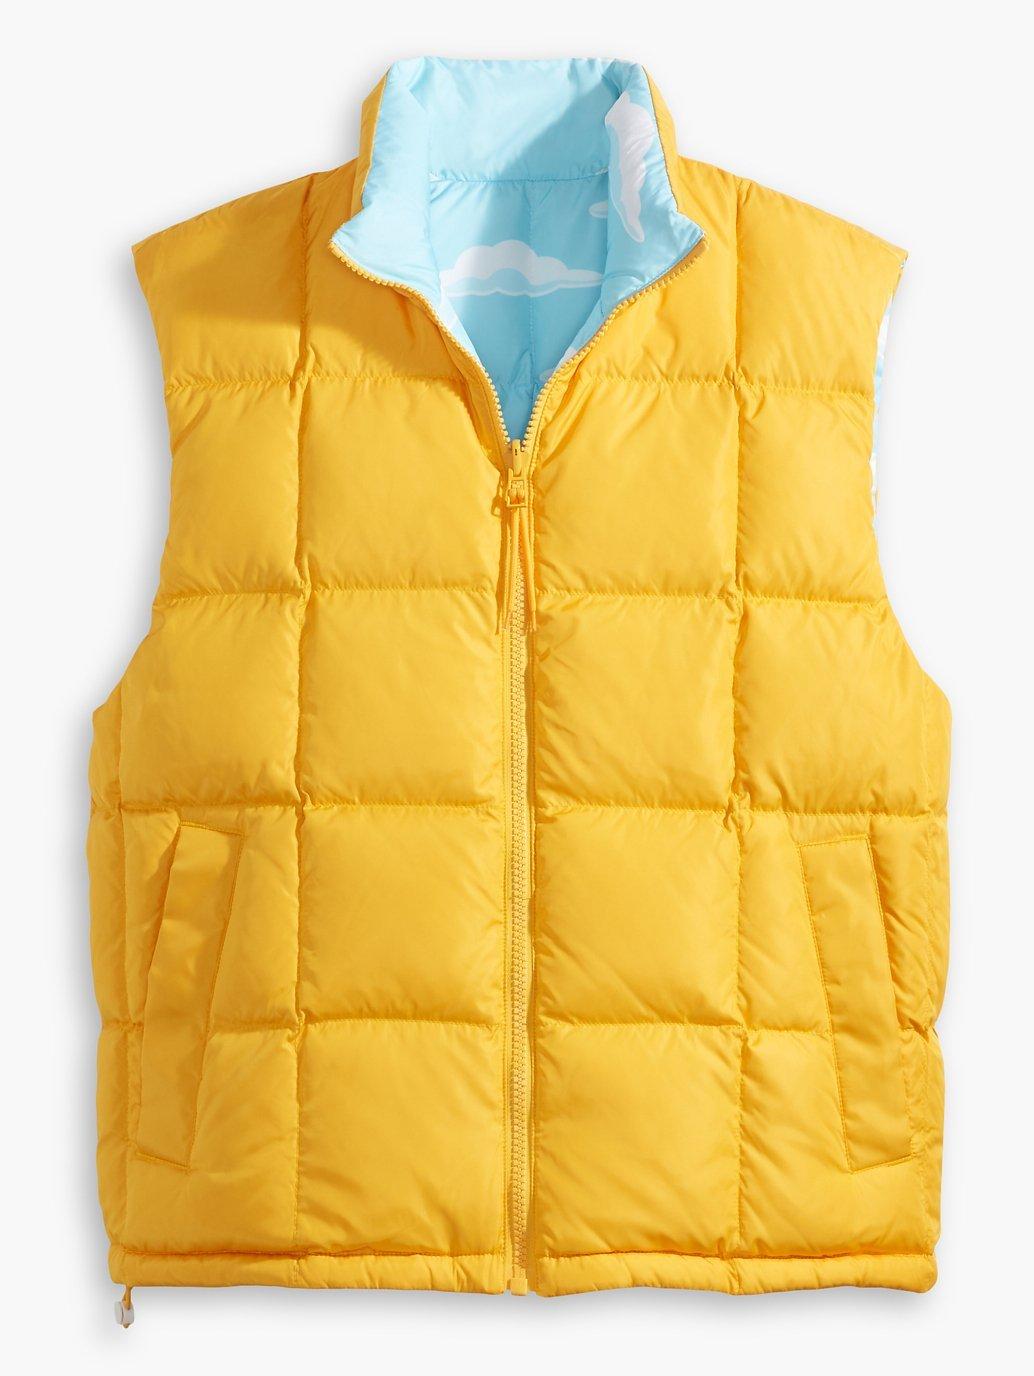 levis malaysia the simpsons x unisex puffer vest A20530000 17 Details